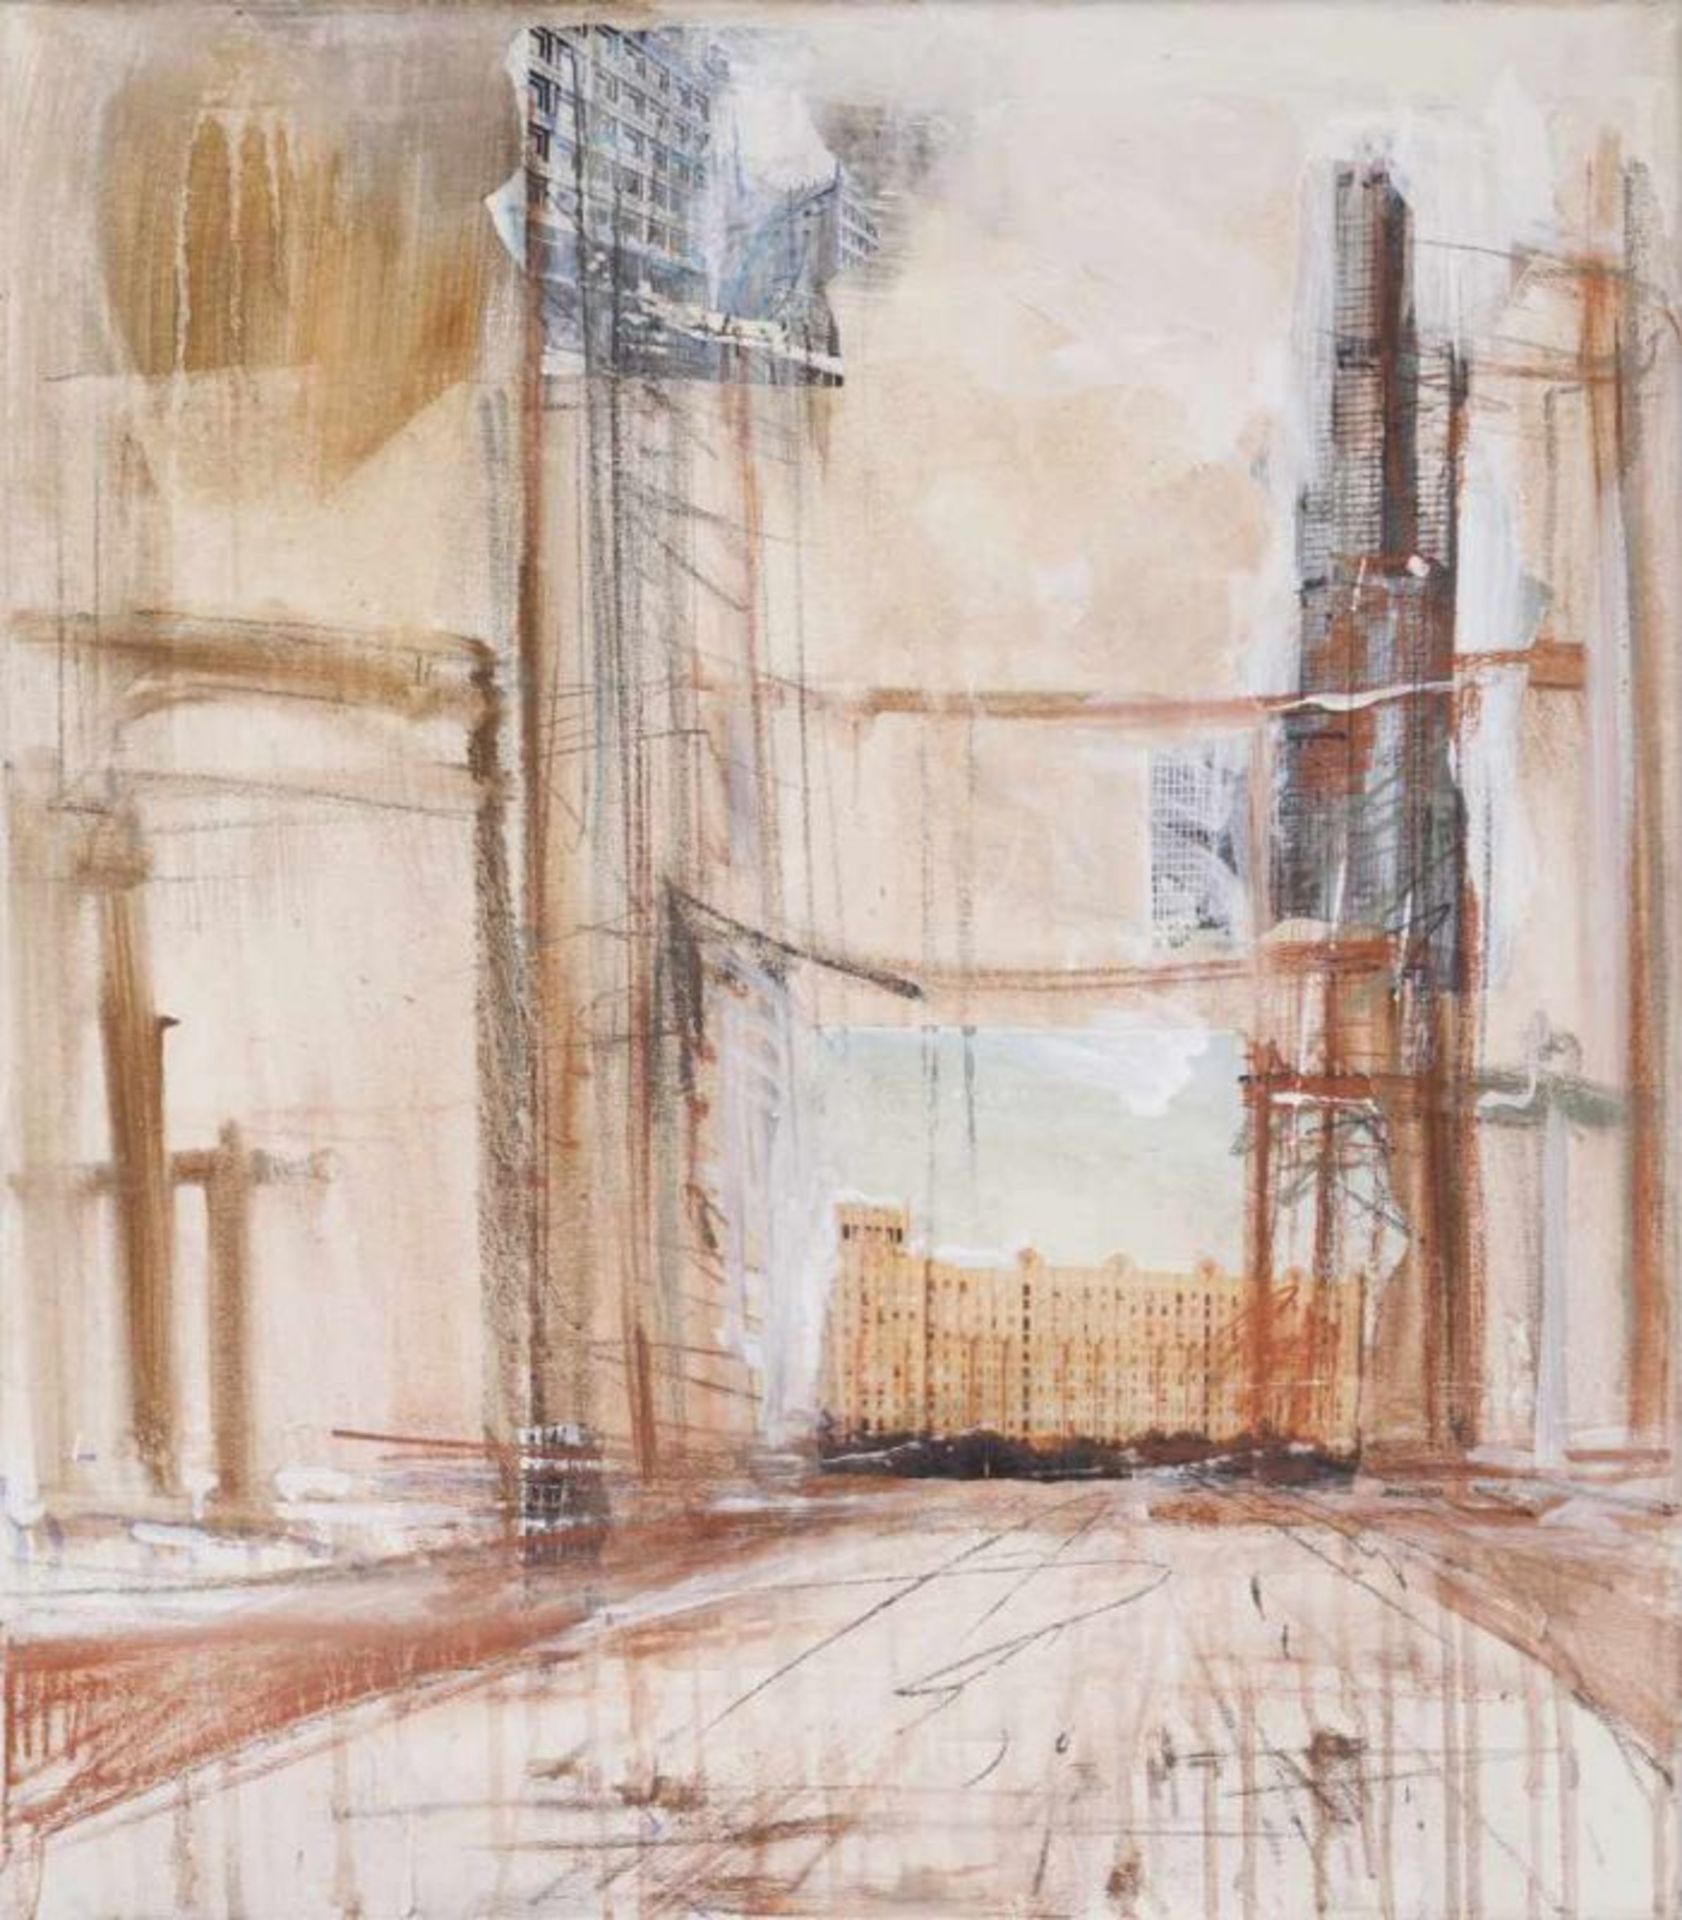 Valery Koshlyakov (n. 1962)"Ein Version der Stadt"Mixed media on canvasSigned and dated 2003 on